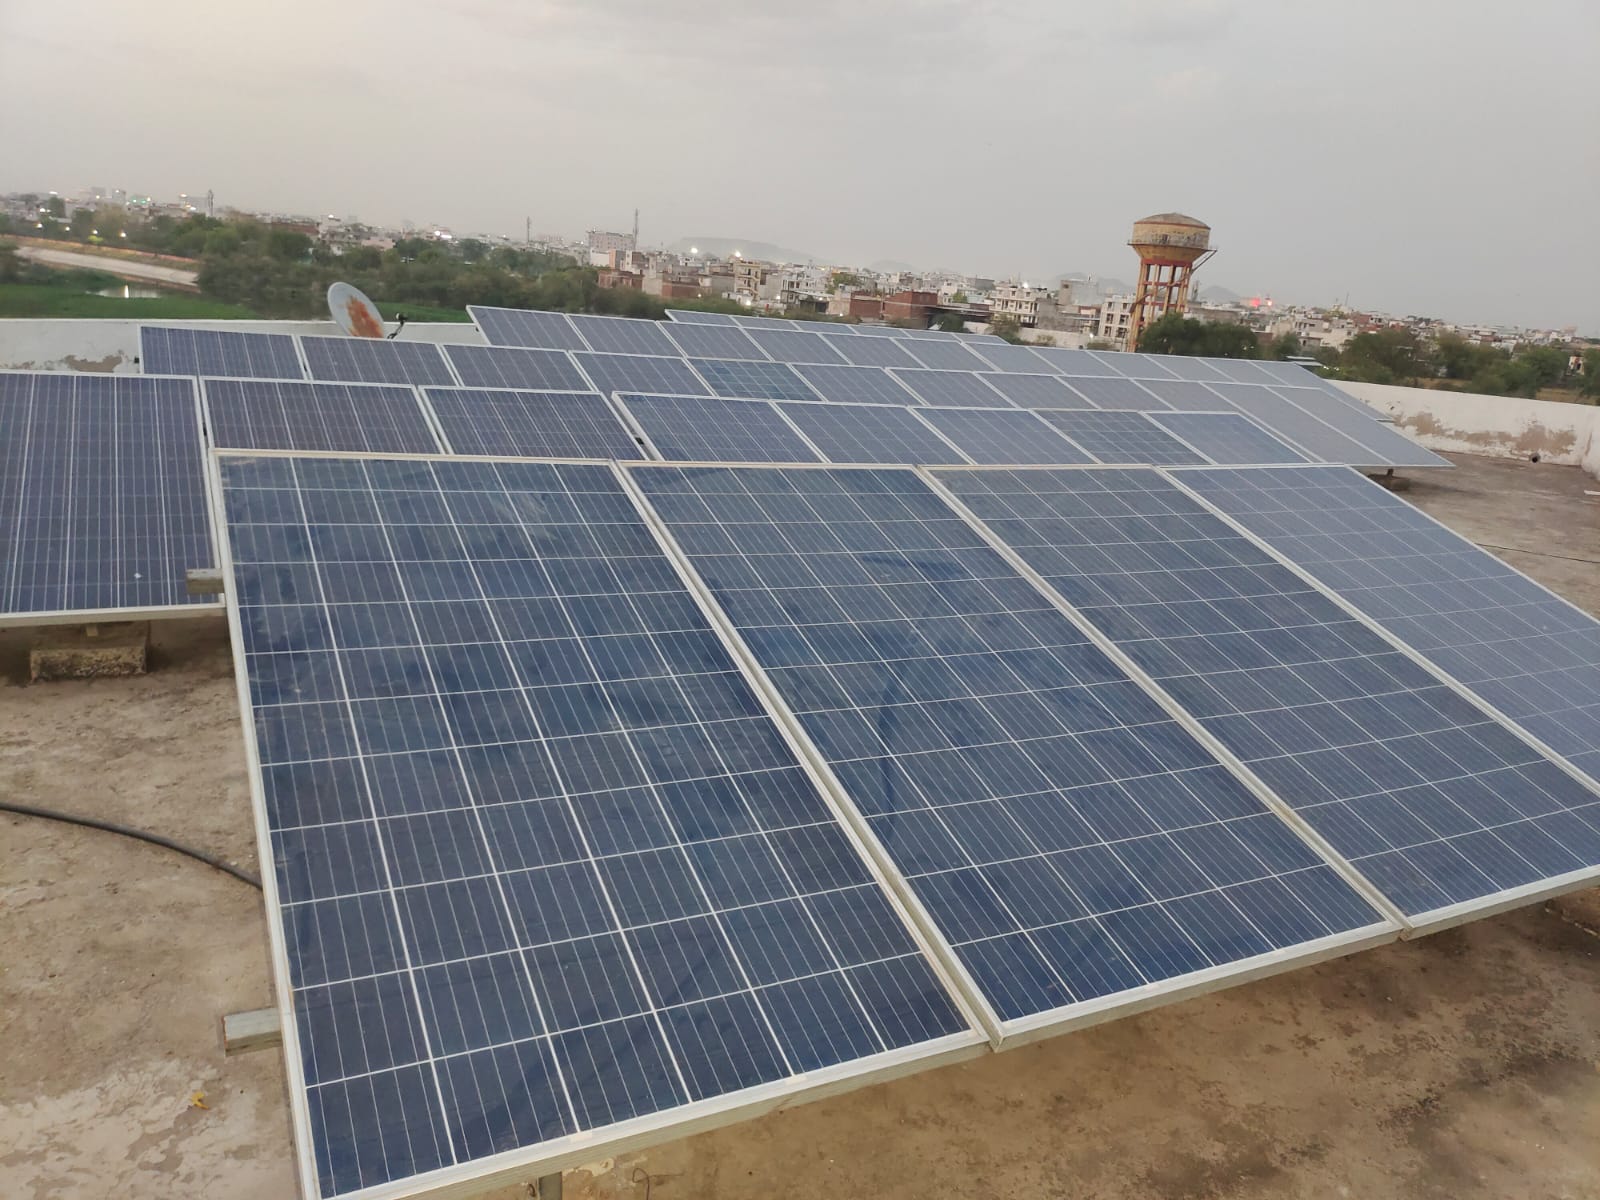 Choosing the Right Solar Panel for Jaipur's Climate